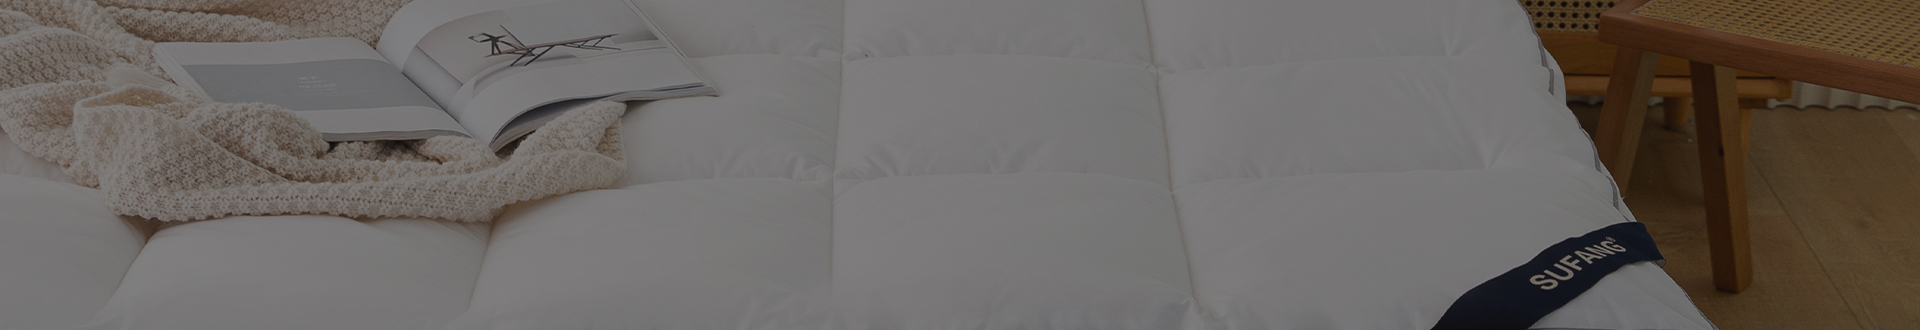 Supply King Size Hotel Bedroom White Bed Cover Elastic Mattress Protector